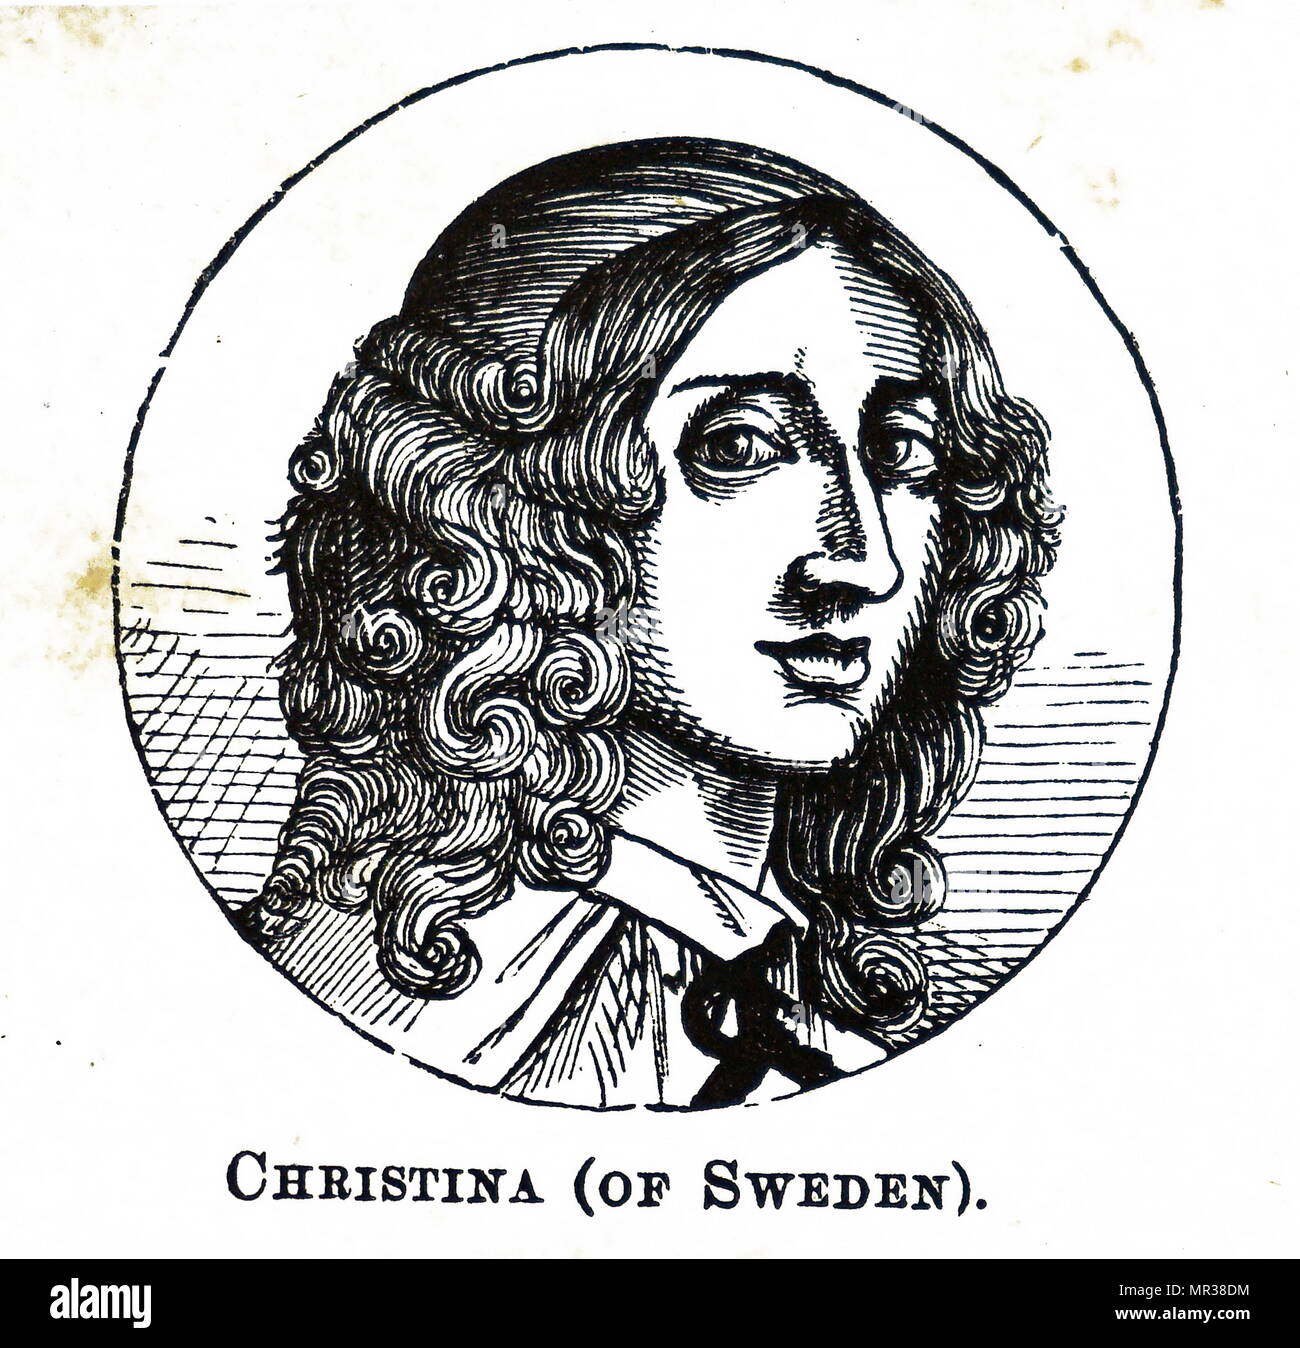 Portrait of Christina, Queen of Sweden (1626-1689) Queen of Sweden from 1632 until her abdication in 1654. Dated 17th century Stock Photo